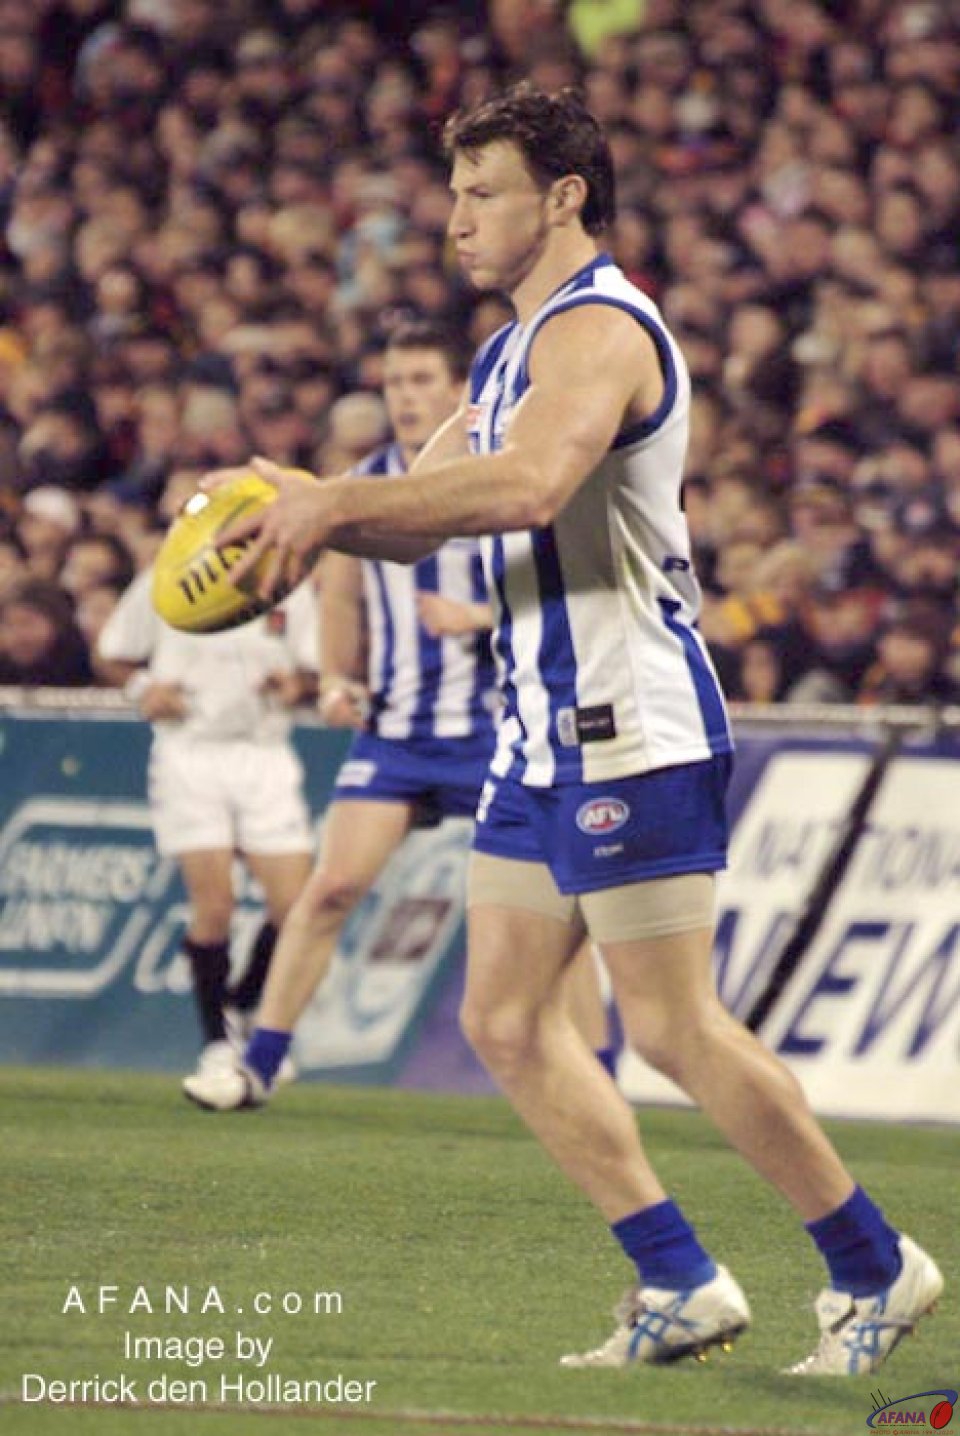 [b]North Melbourne's Brett Harvey about to attempt a short pass after another hard fought posession[/b]